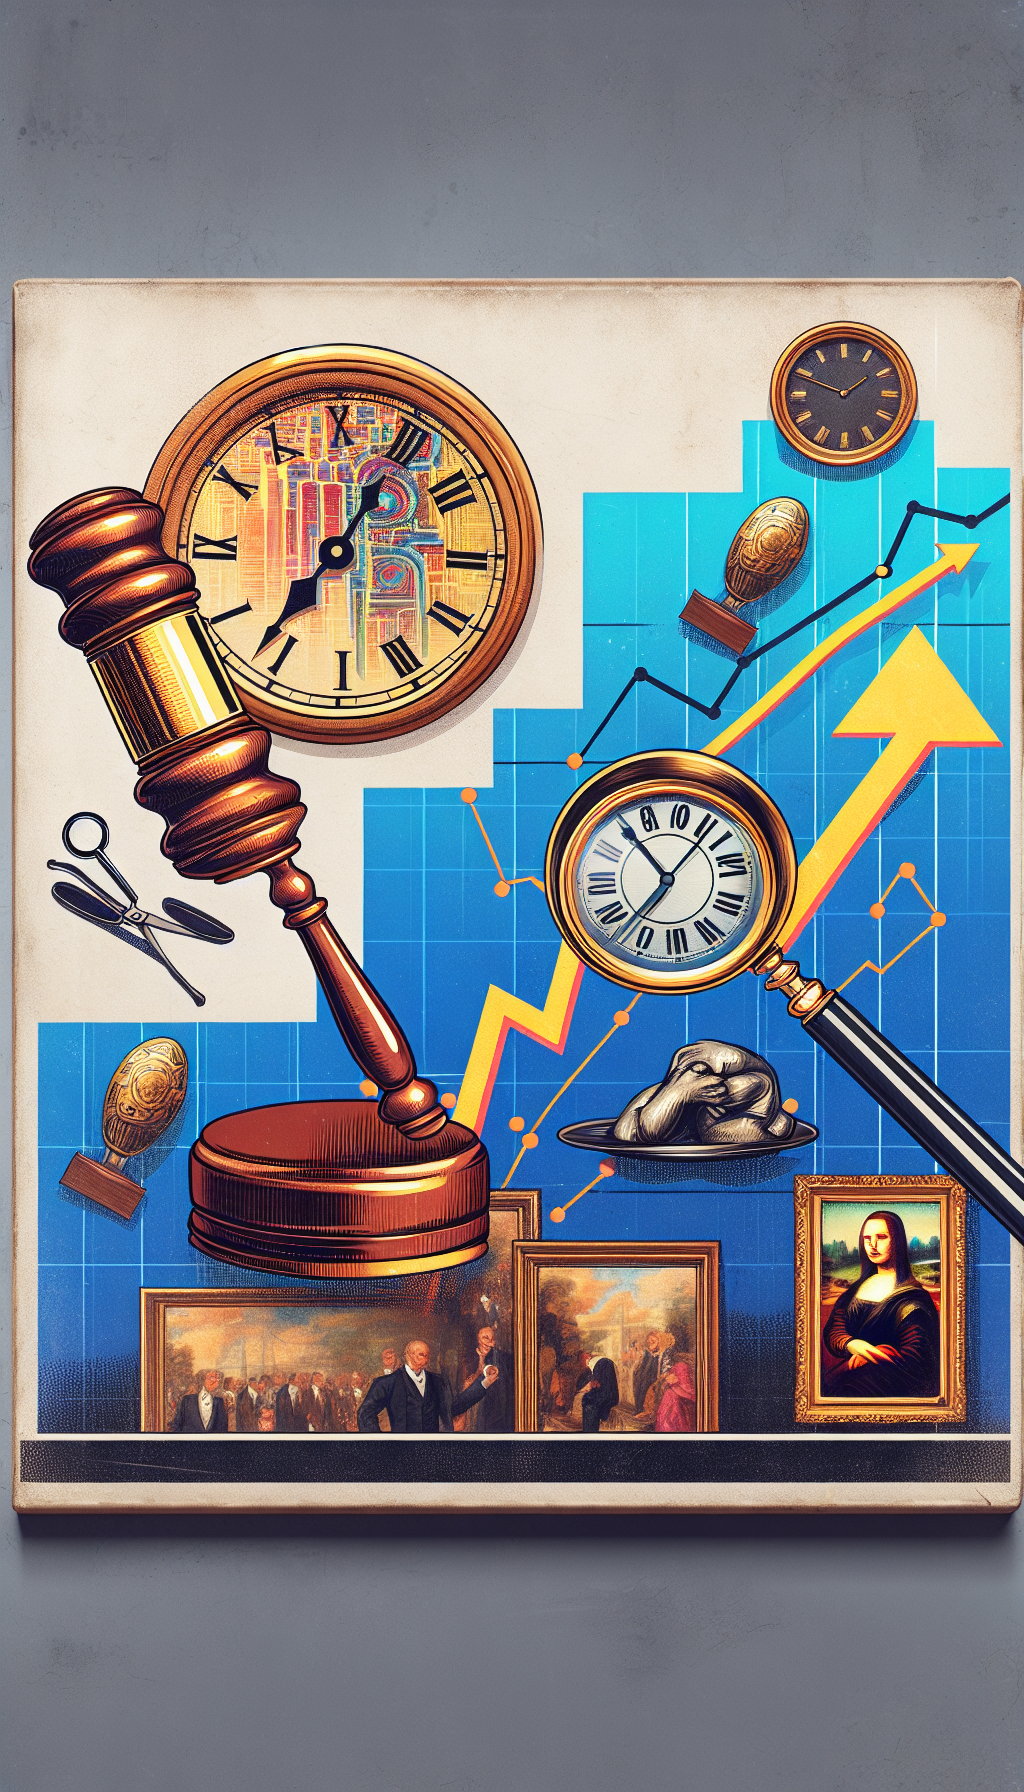 An illustration depicts a stylish auction gavel poised above a vibrant graph of ascending market trends, twin images faded beneath: a clock inscribed within the graph, ticking towards a high point and a magnifying glass scrutinizing a classic painting's details. This symbolizes strategic timing and the precision of fine art appraisal in informed selling.